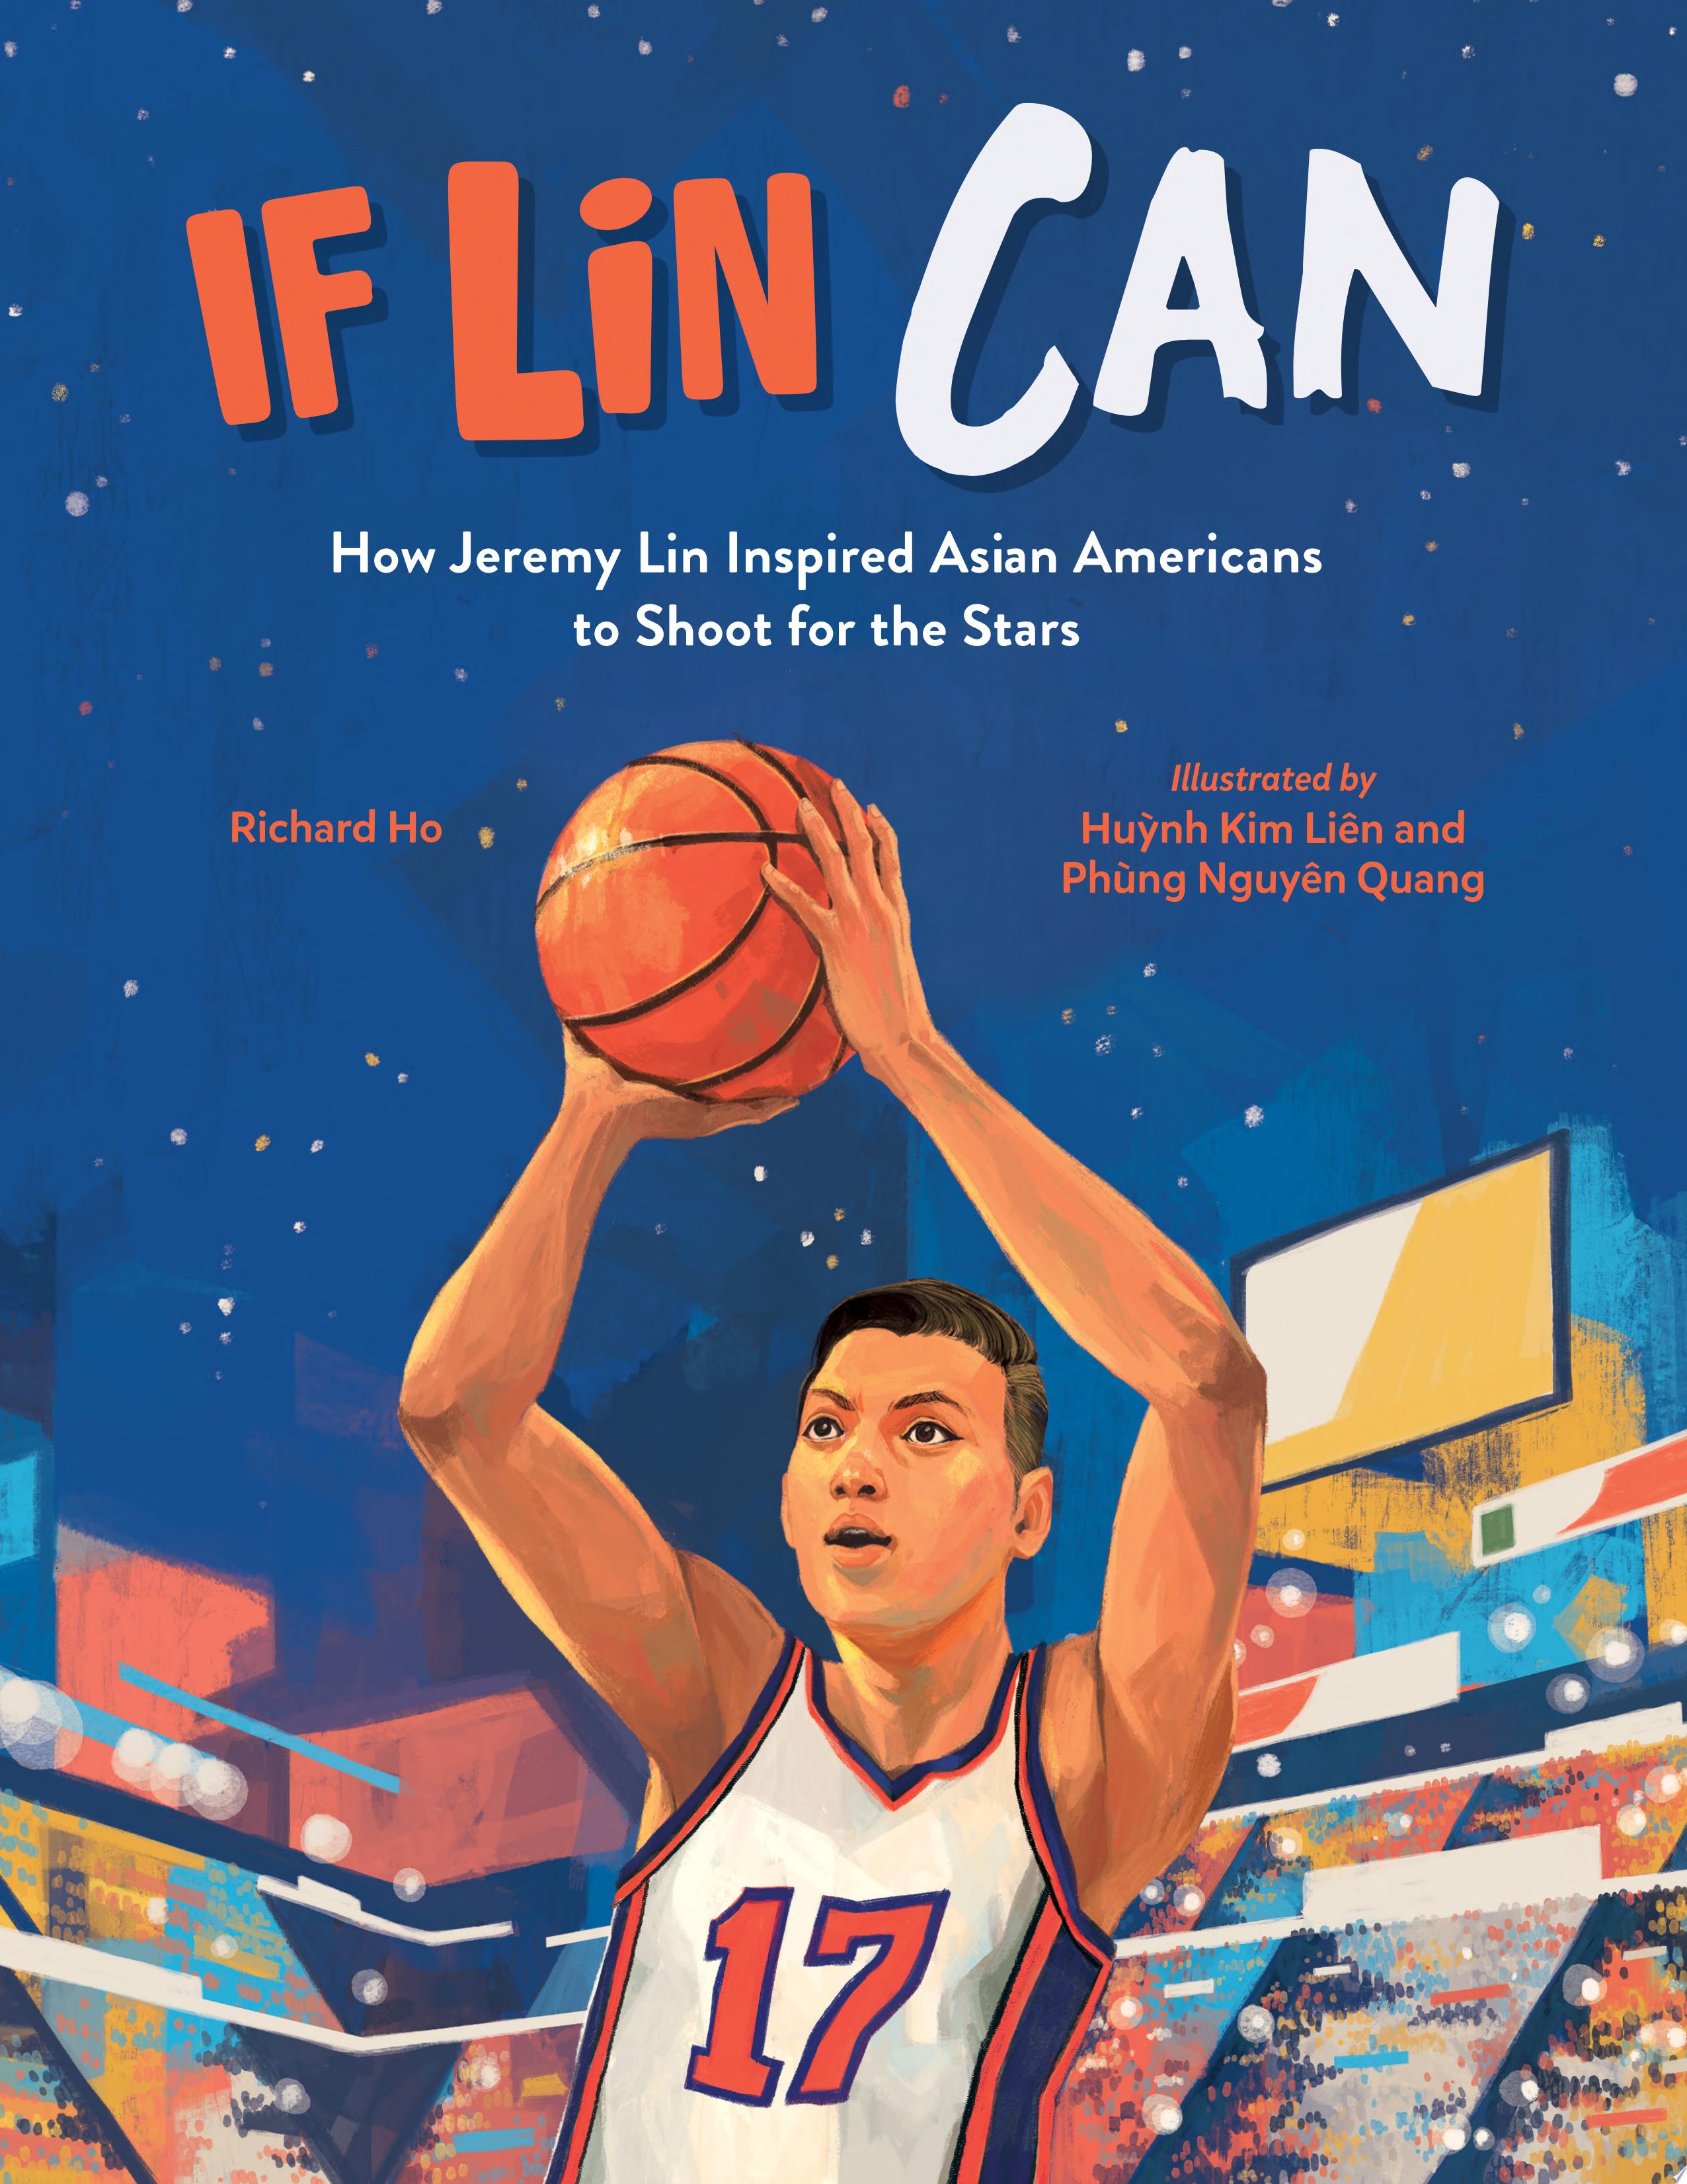 Image for "If Lin Can"